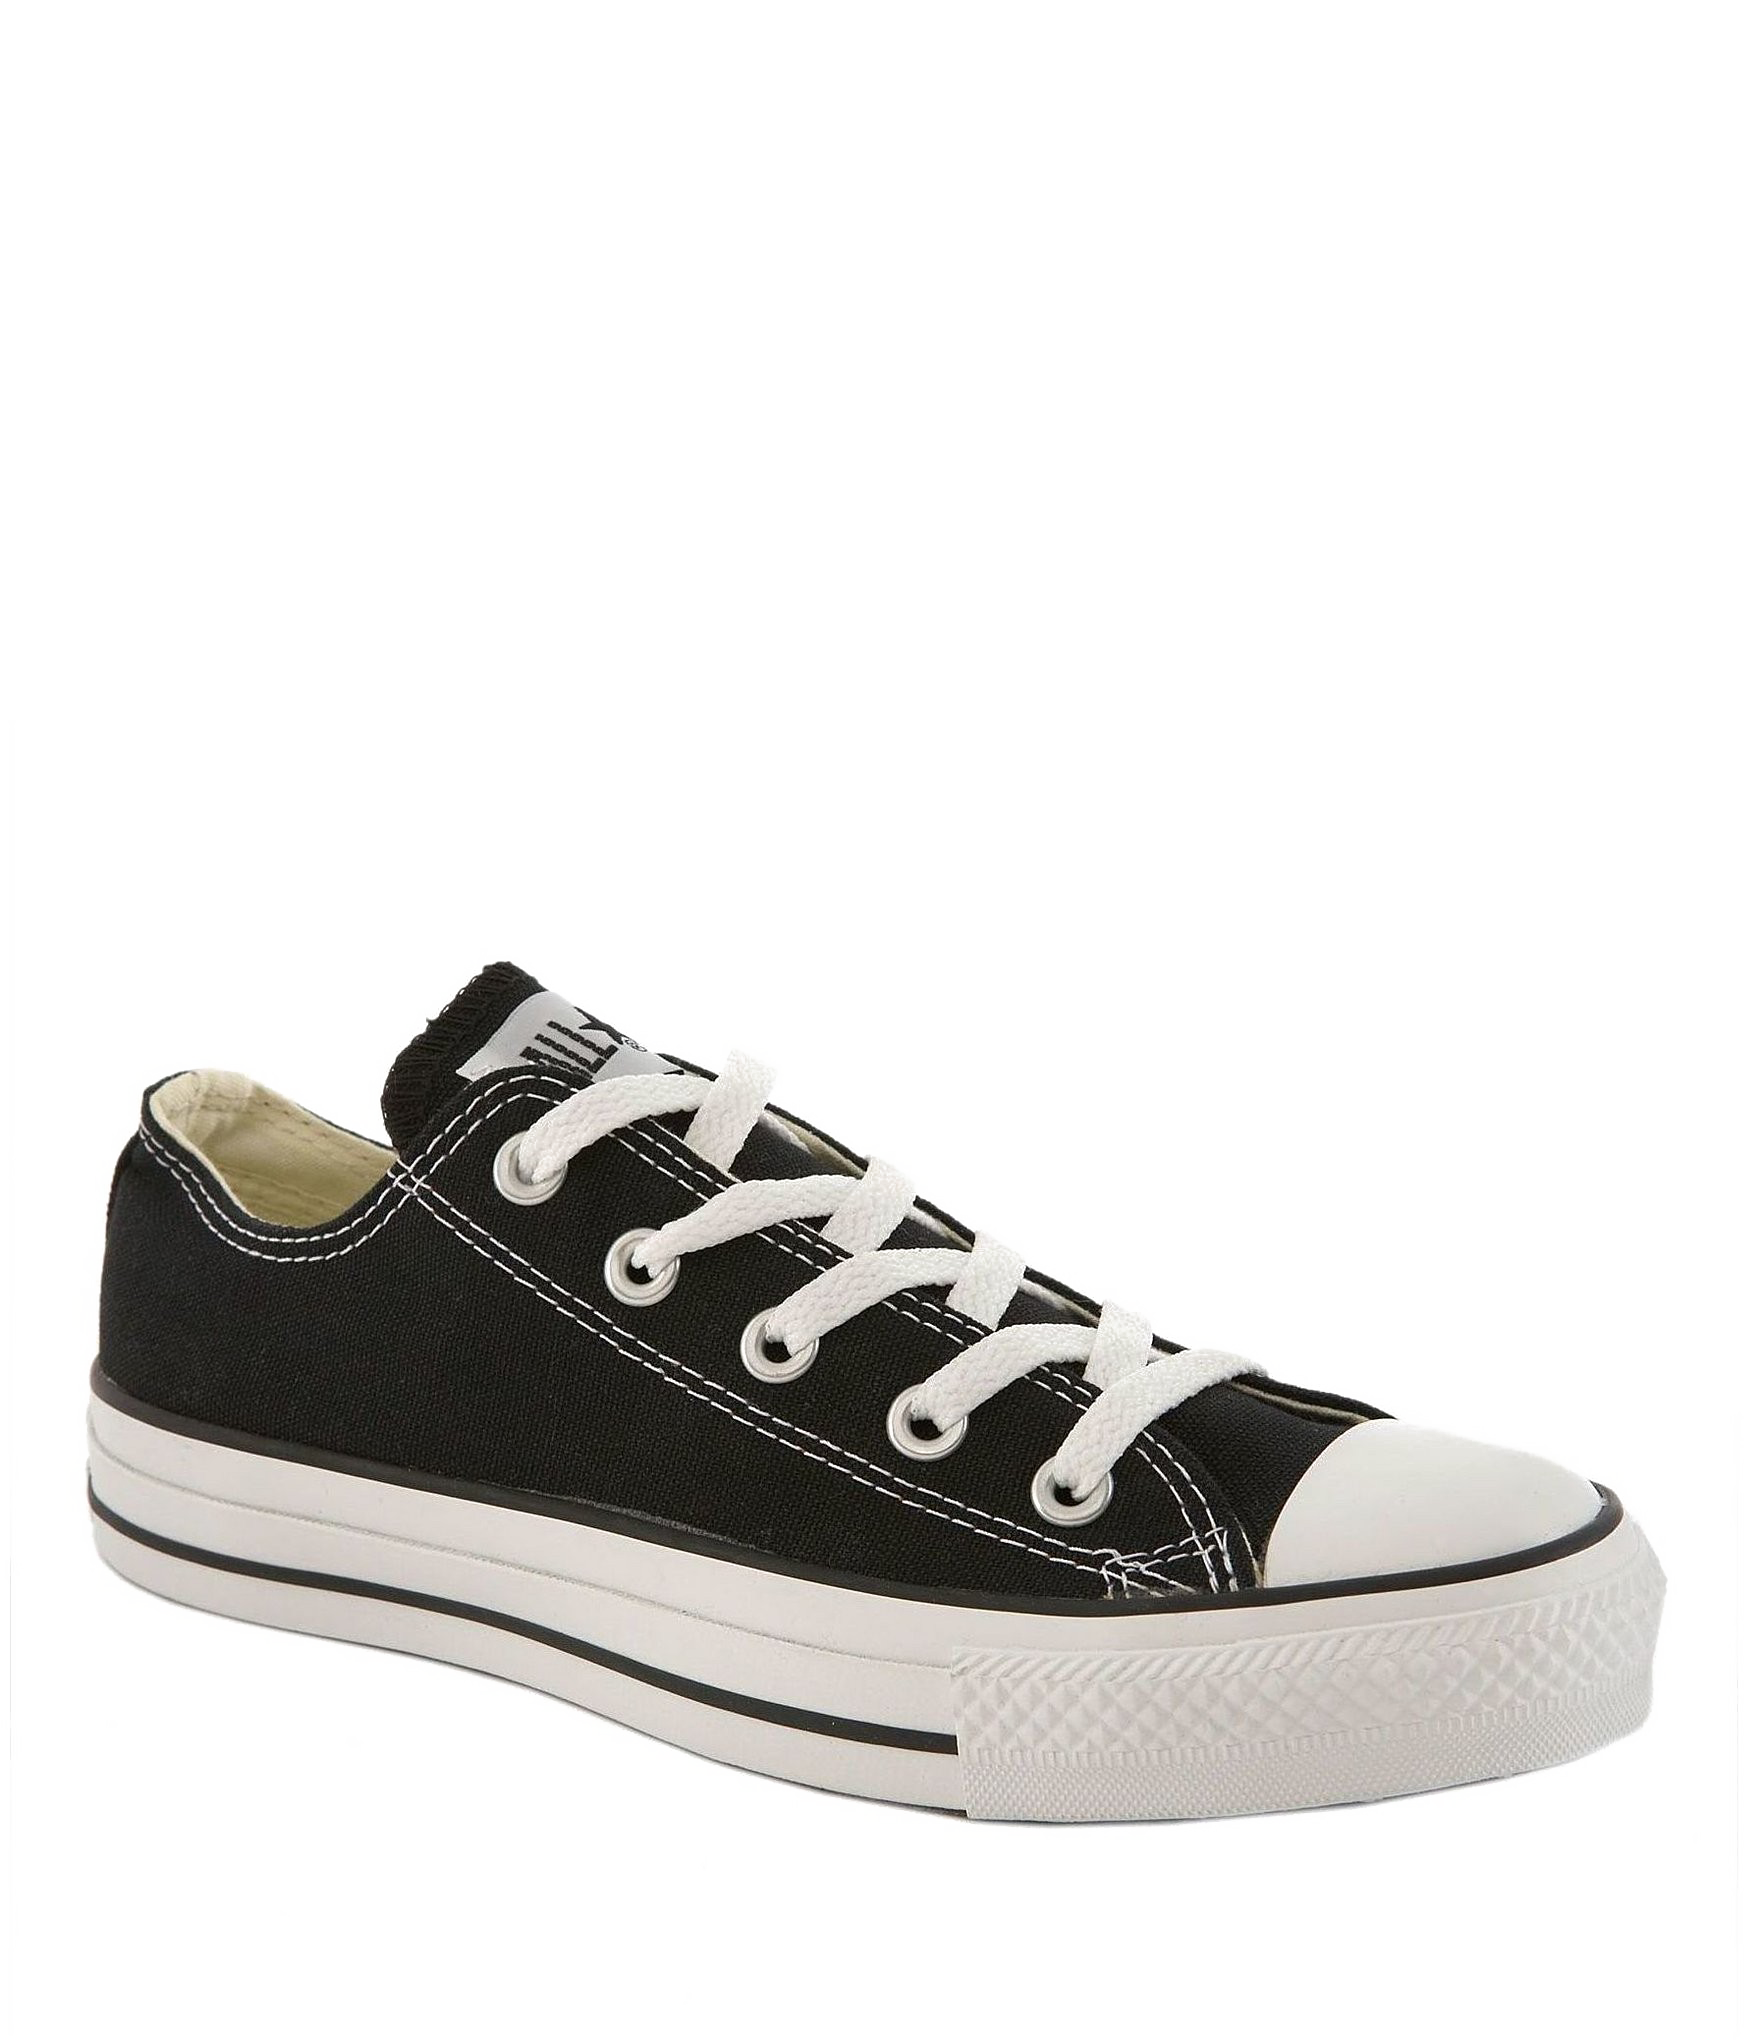 Sneakers Photos Free Clipart HD PNG Image